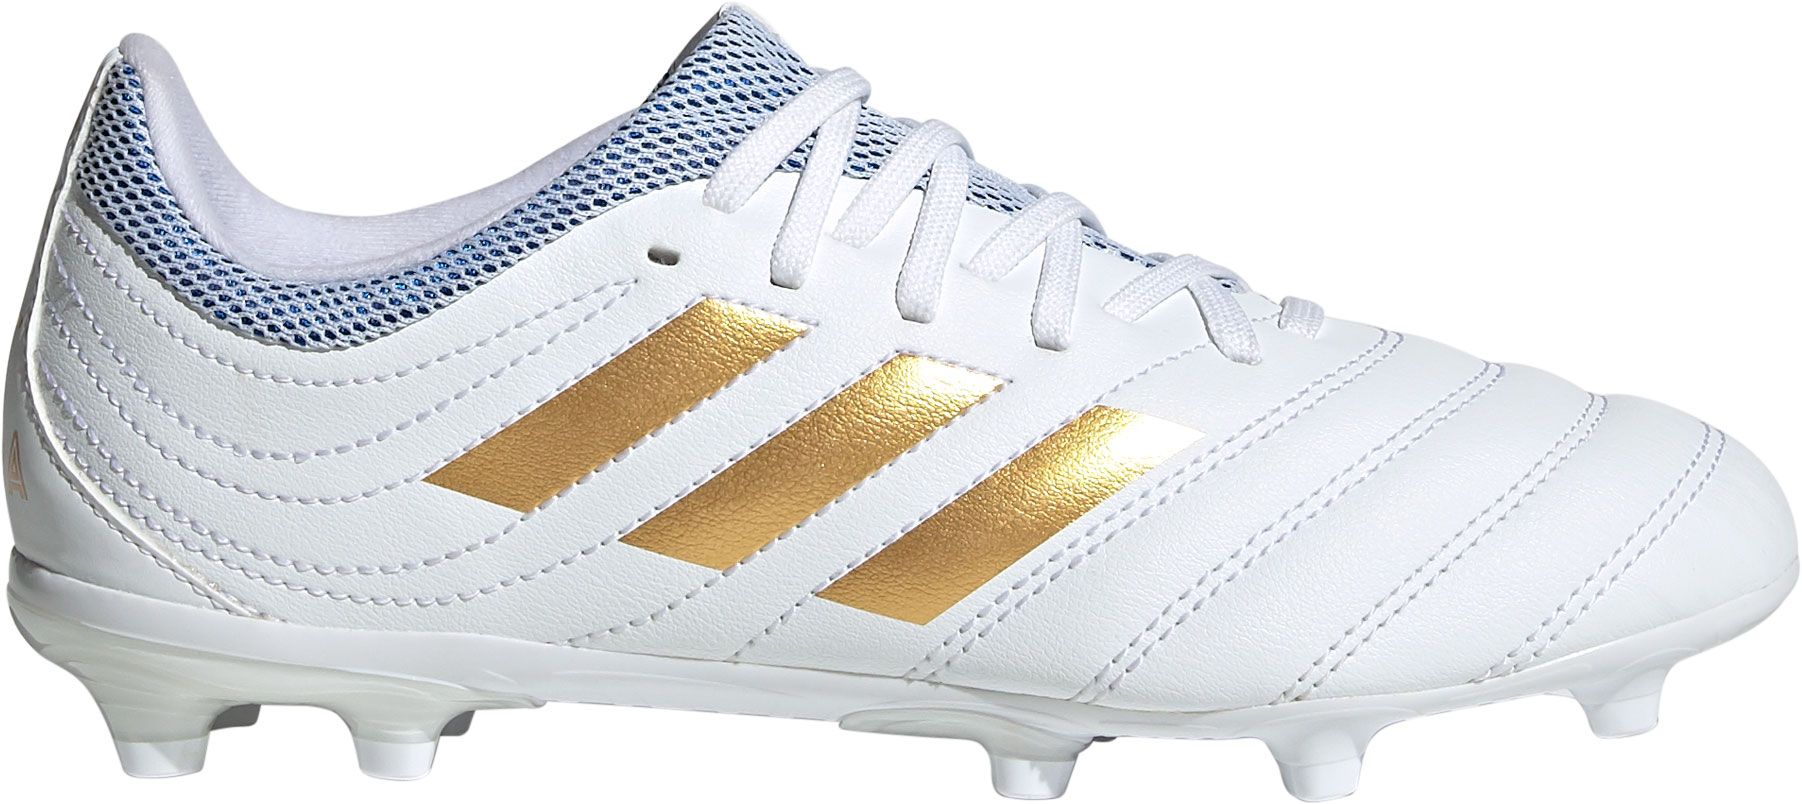 adidas white and gold cleats